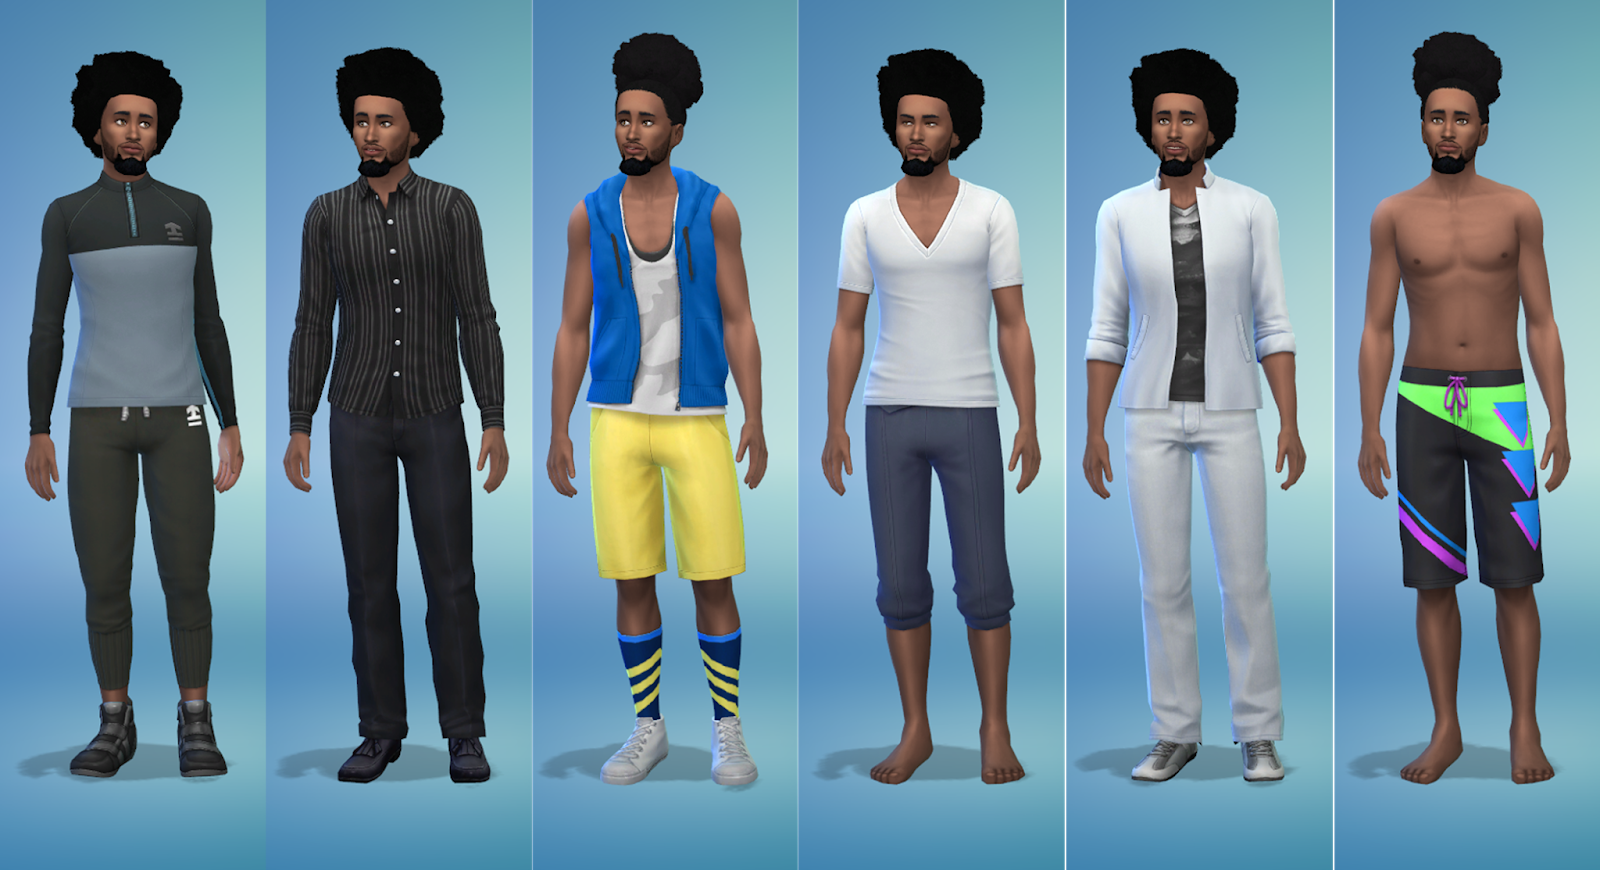 Sims 4: Family Moments: Sims 4 Sims - Richard Allen Jr. (for download)